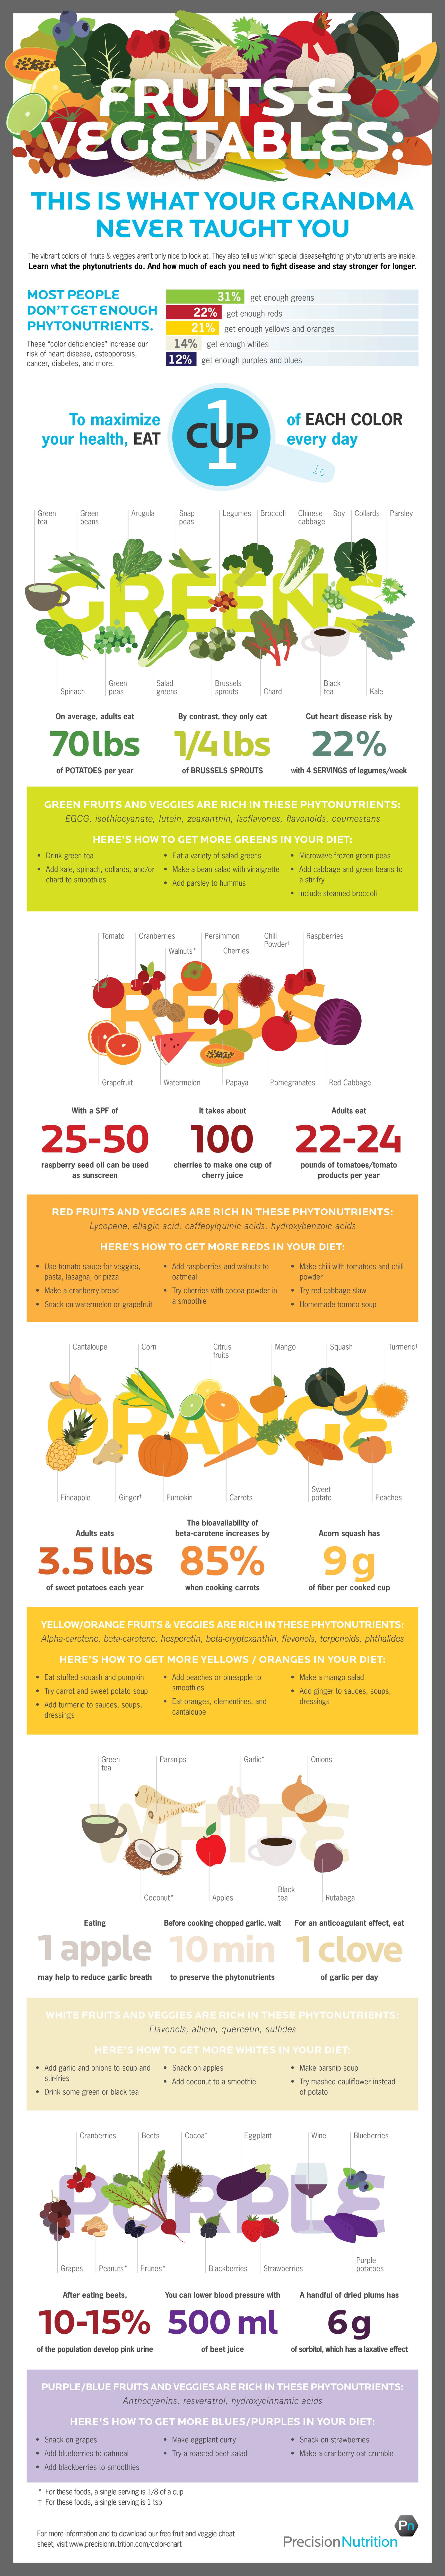 Fruit and Vegetable Infographic Fruits and vegetables. [Infographic] This is what your grandma never taught you.